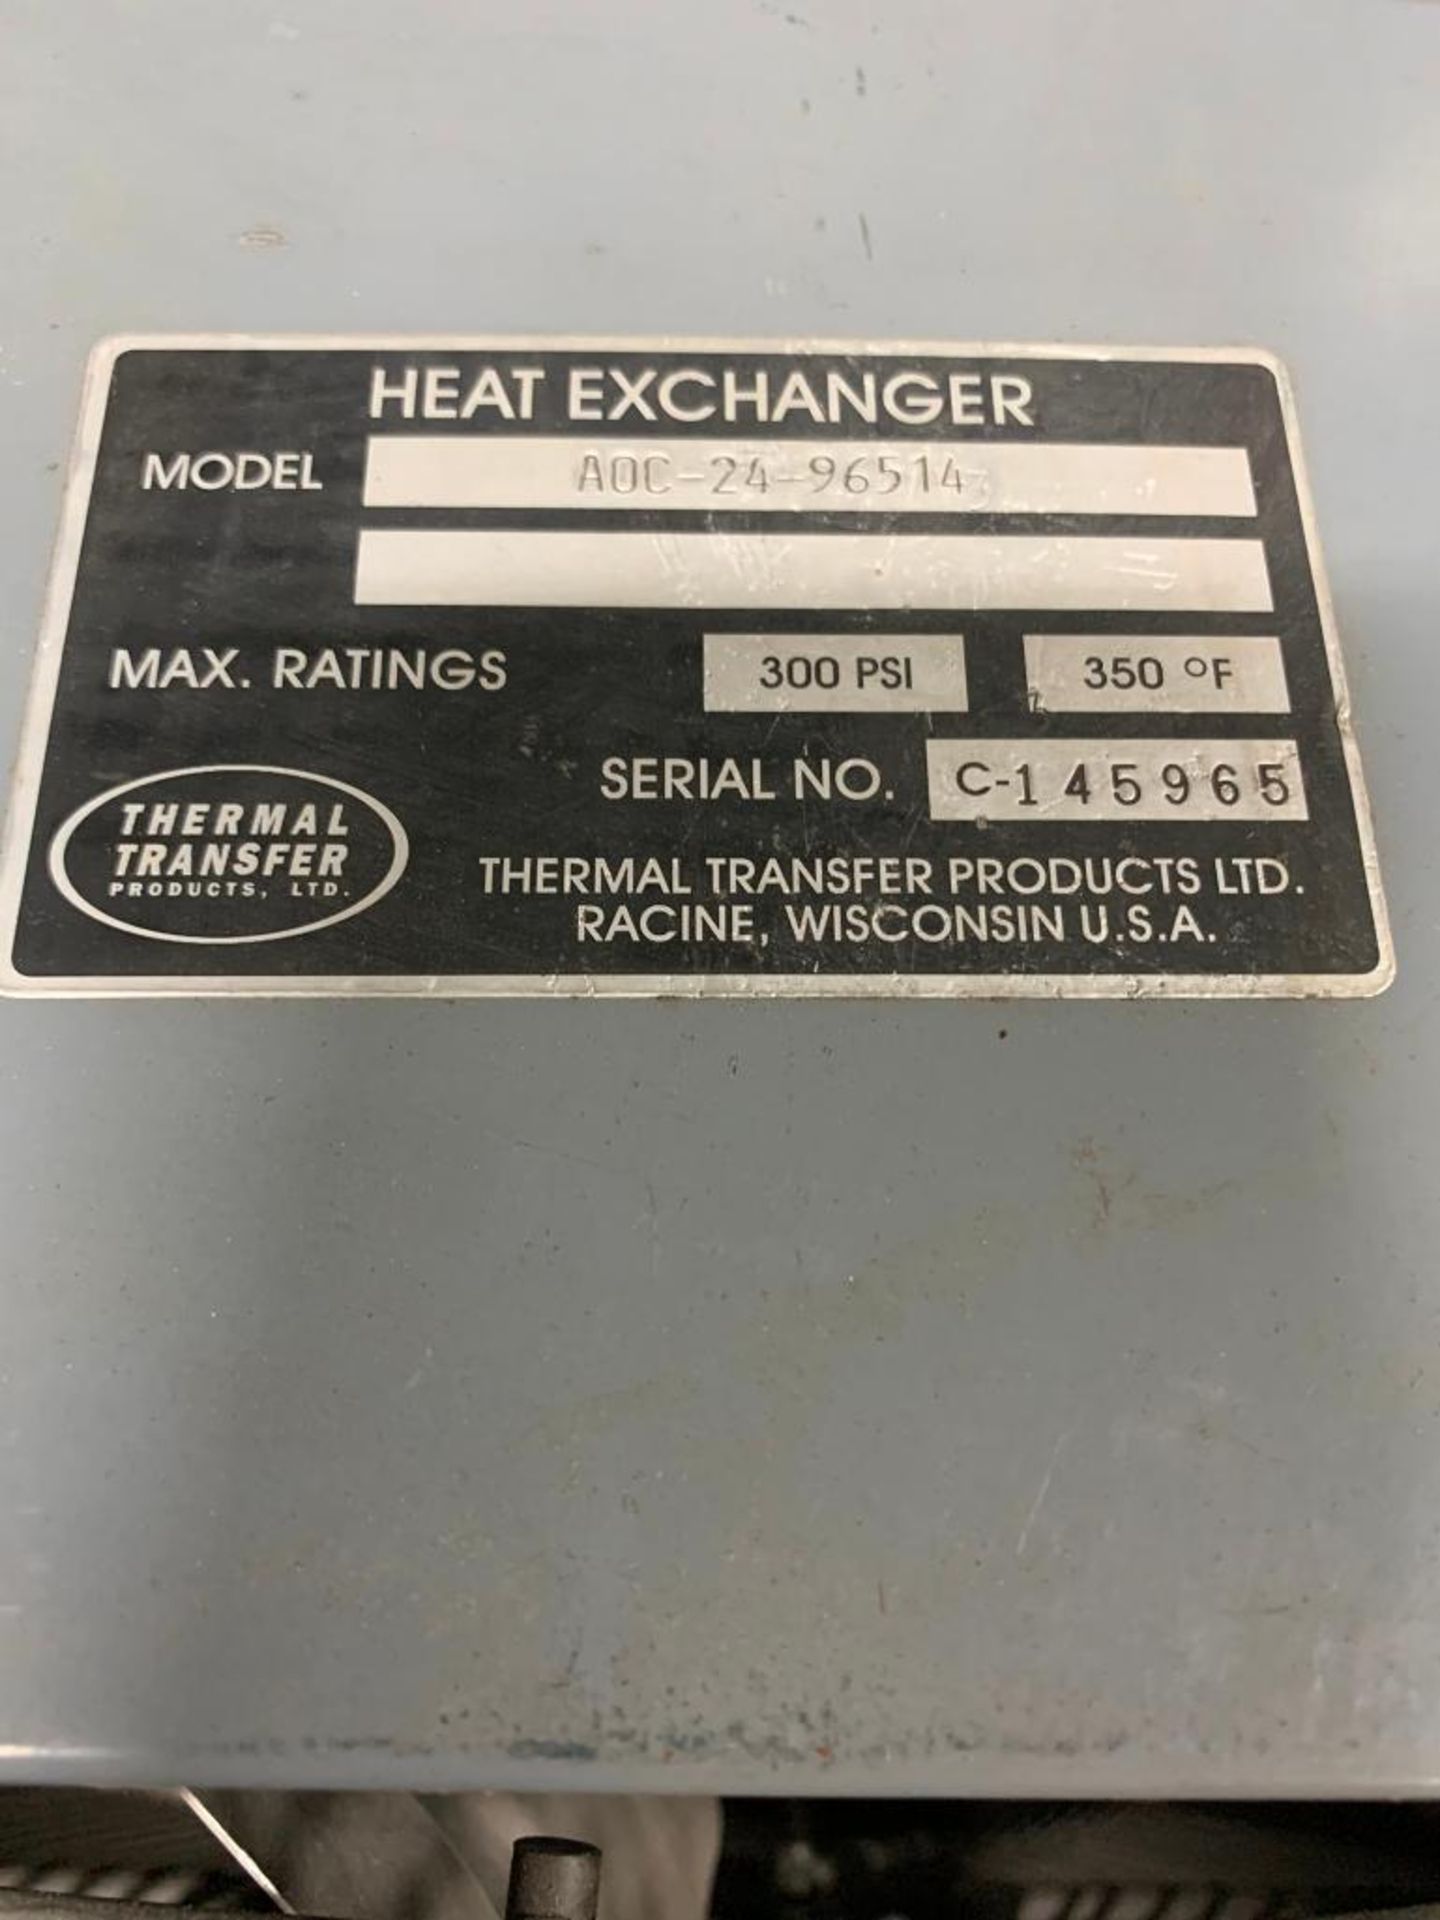 Thermal Transfer Products Heat Exchanger, Model AOC-24-96514 & (2) Heating Elements - Image 2 of 5